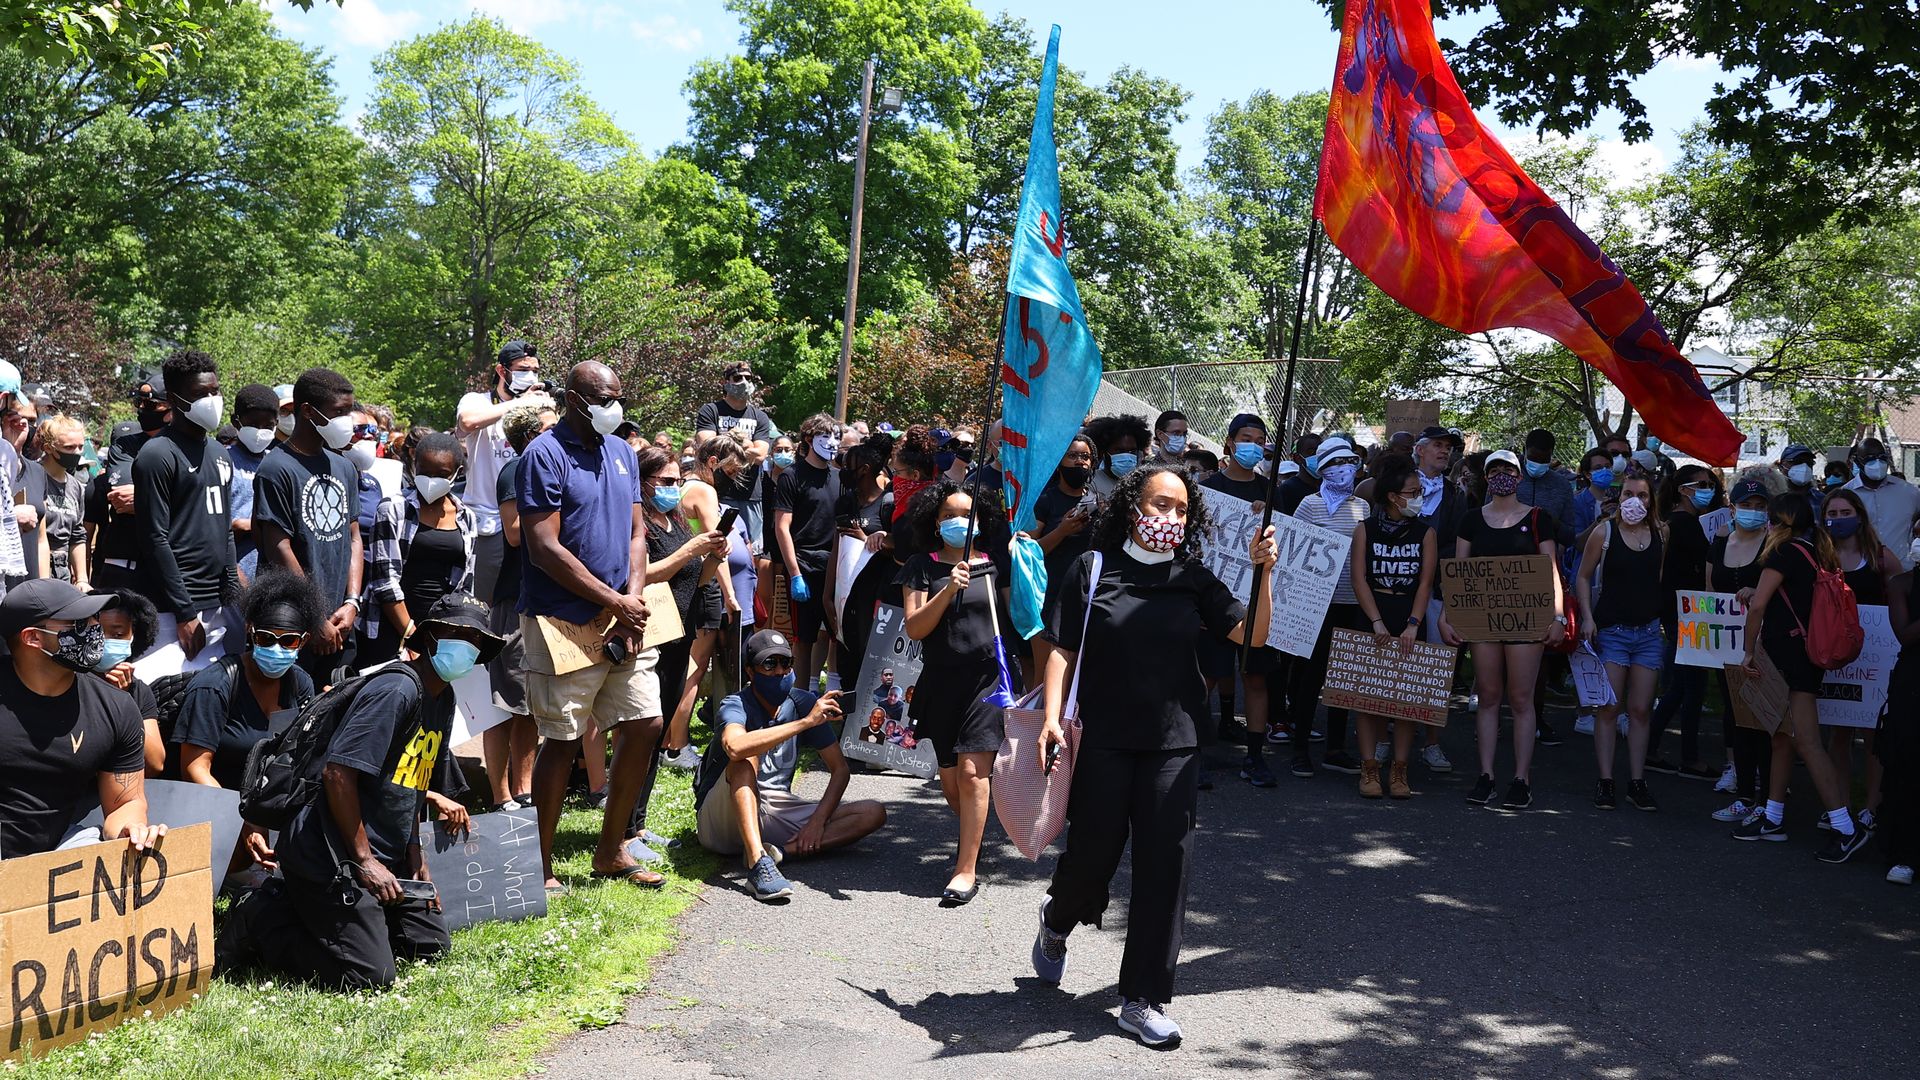  A peaceful group of very diverse protesters hold up signs during a Black Lives Matter protest on June 07, 2020, at Taylor Park Millburn, NJ